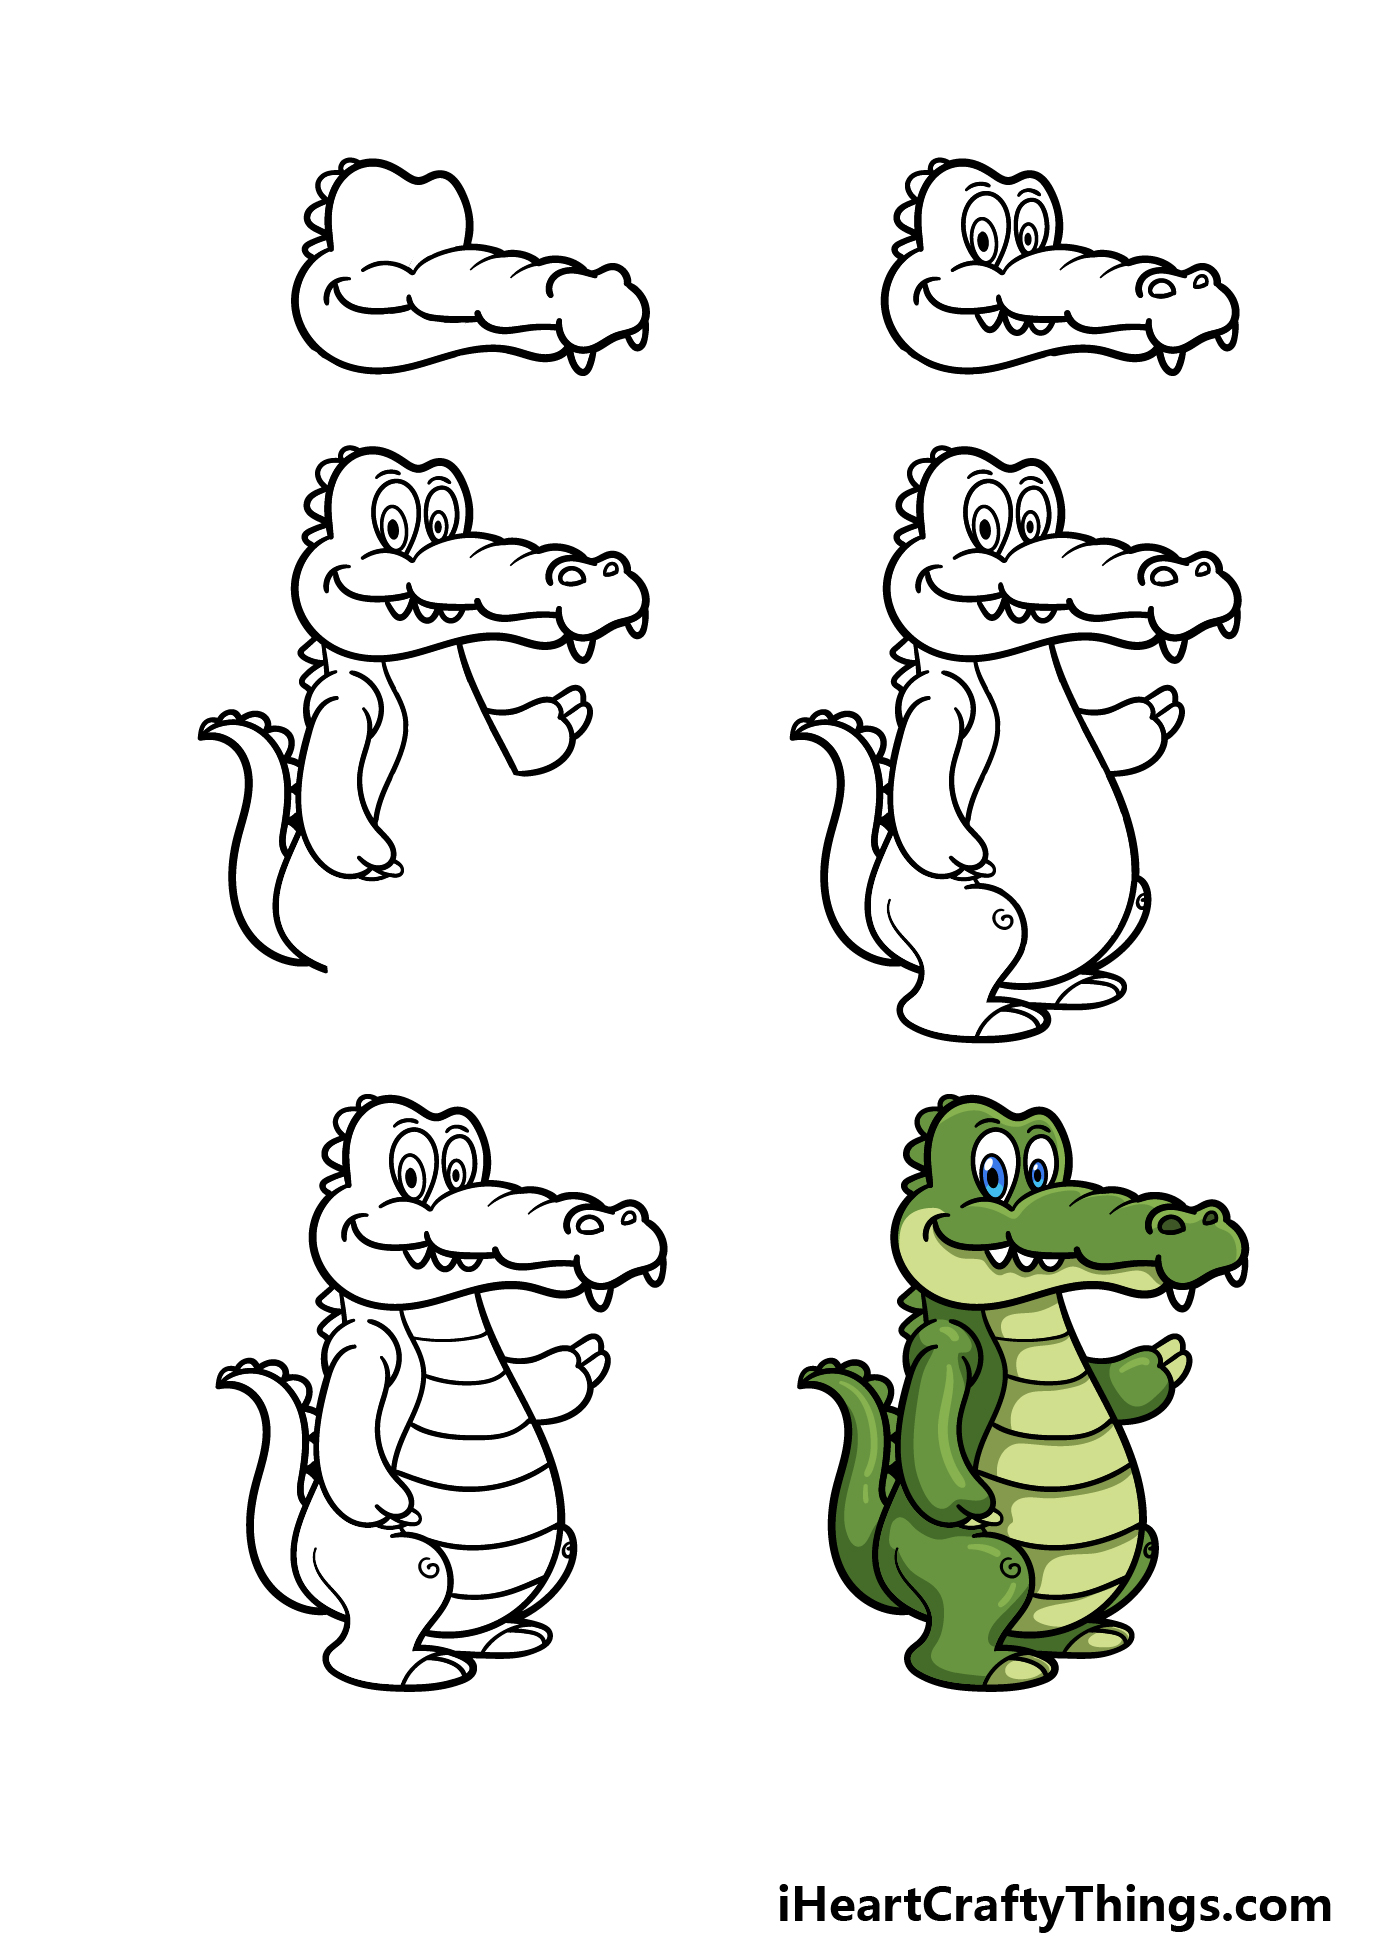 how to draw a Cartoon Alligator in 6 easy steps